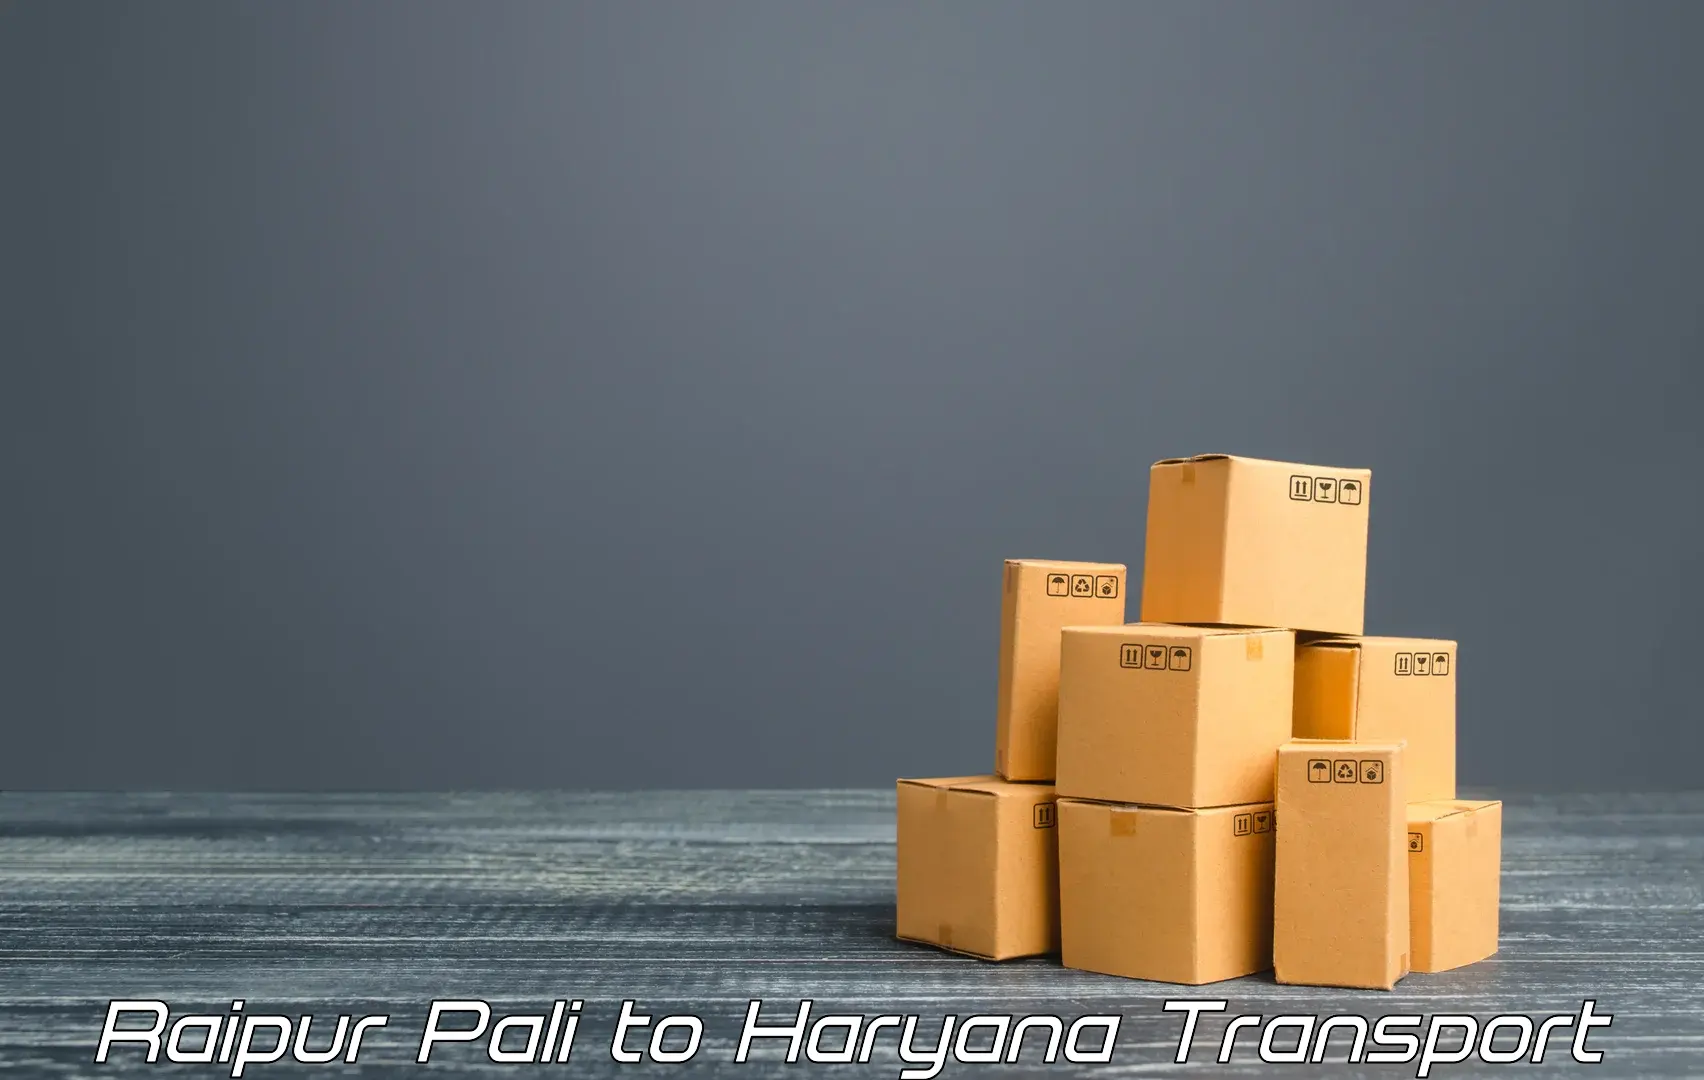 Container transport service Raipur Pali to Pinjore